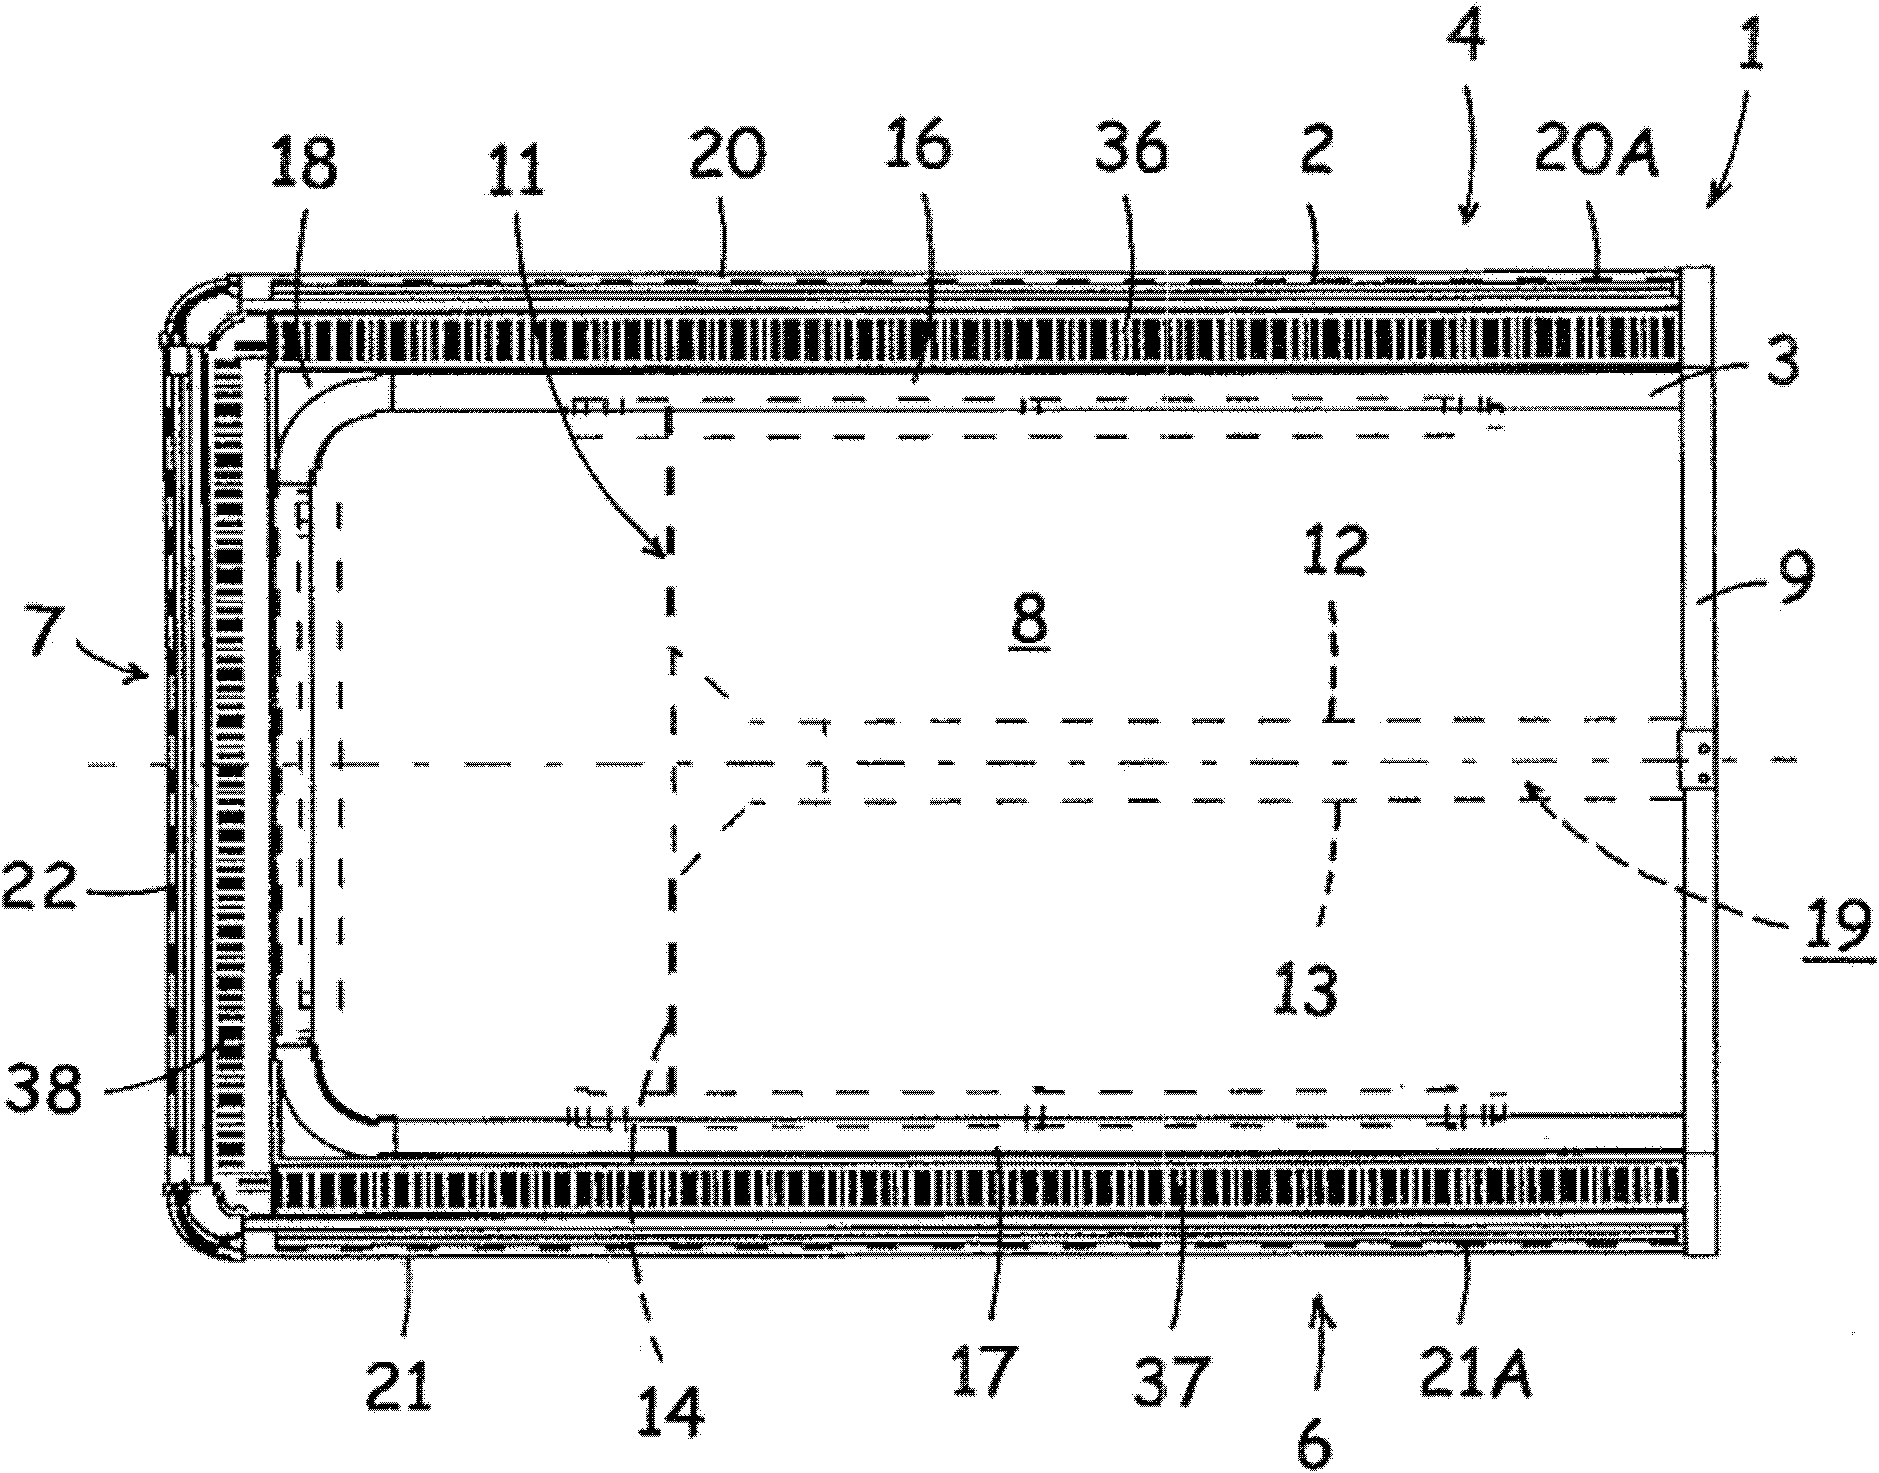 Condensed water evaporating apparatus of cooling device